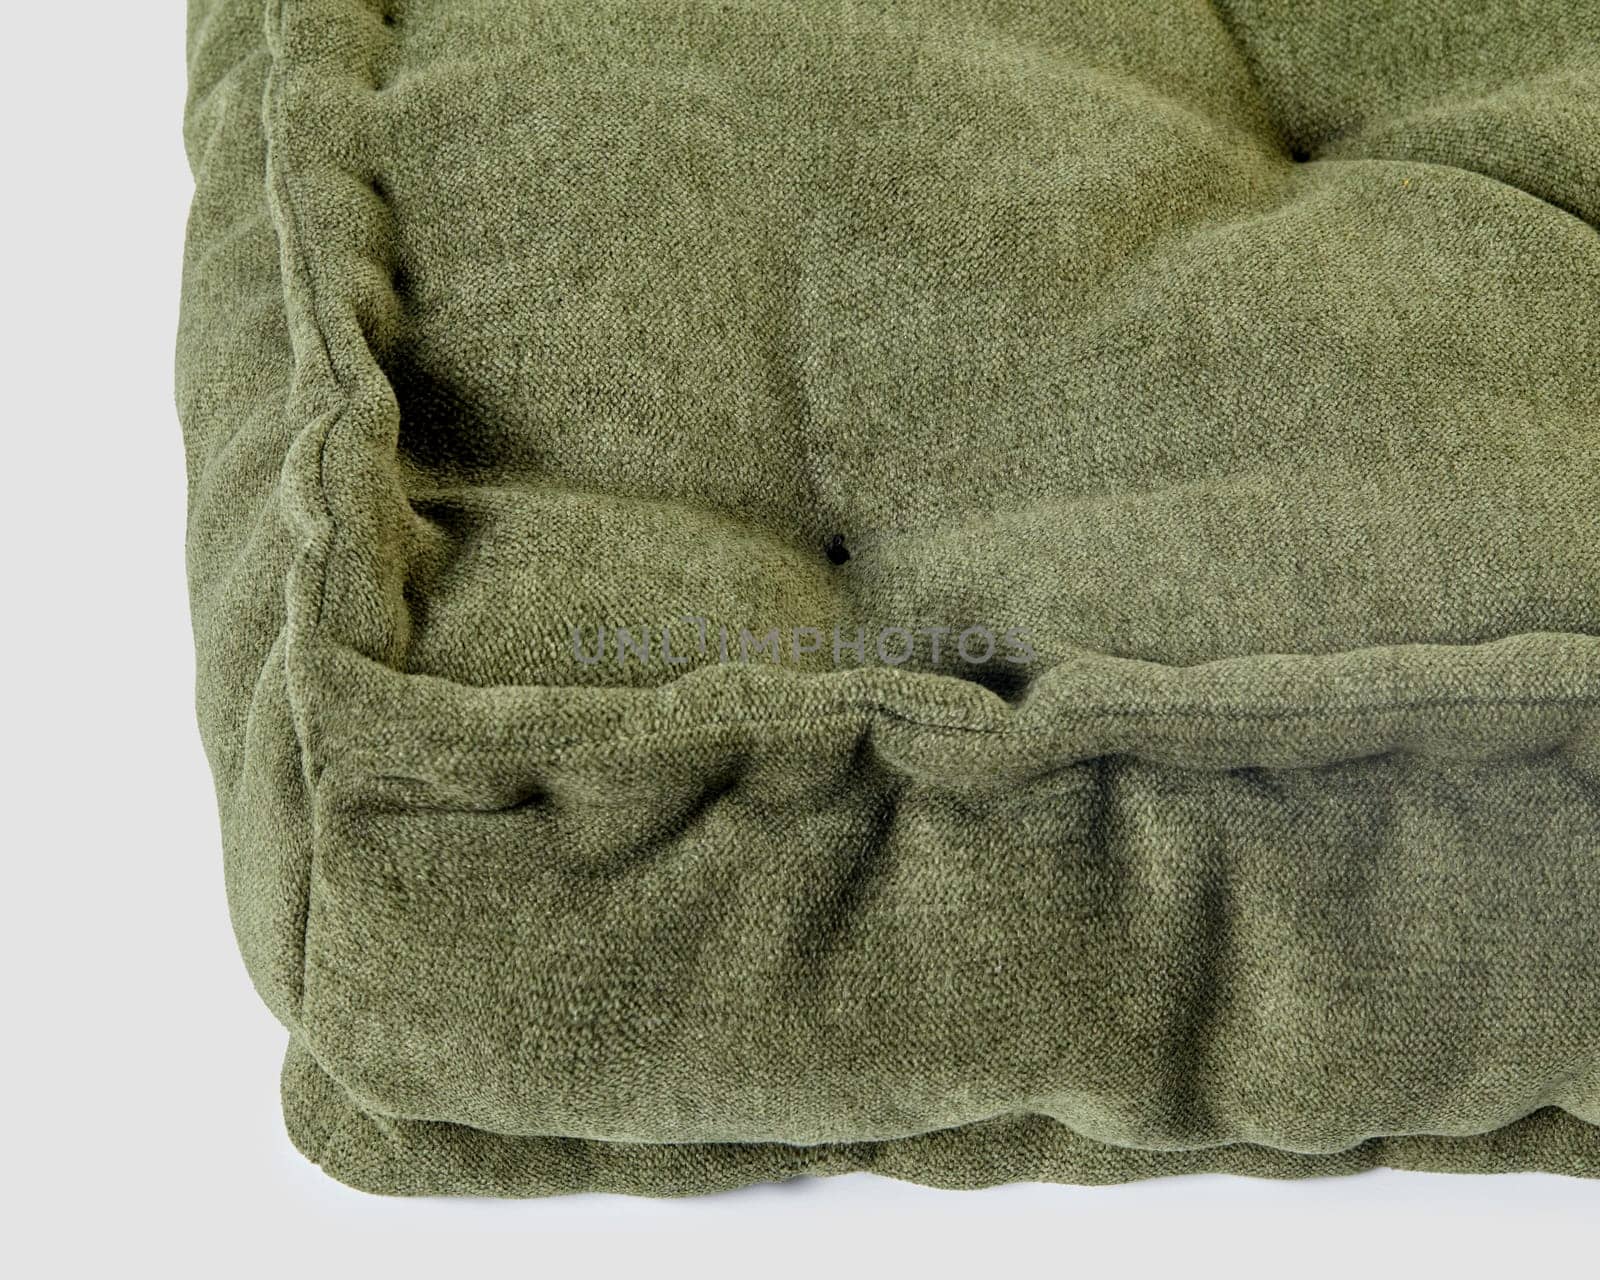 Closeup detailed image of cozy green linen floor cushion, exemplifying comfort and style with soft, ruffled texture and durable design. Handmade accessory for home decor